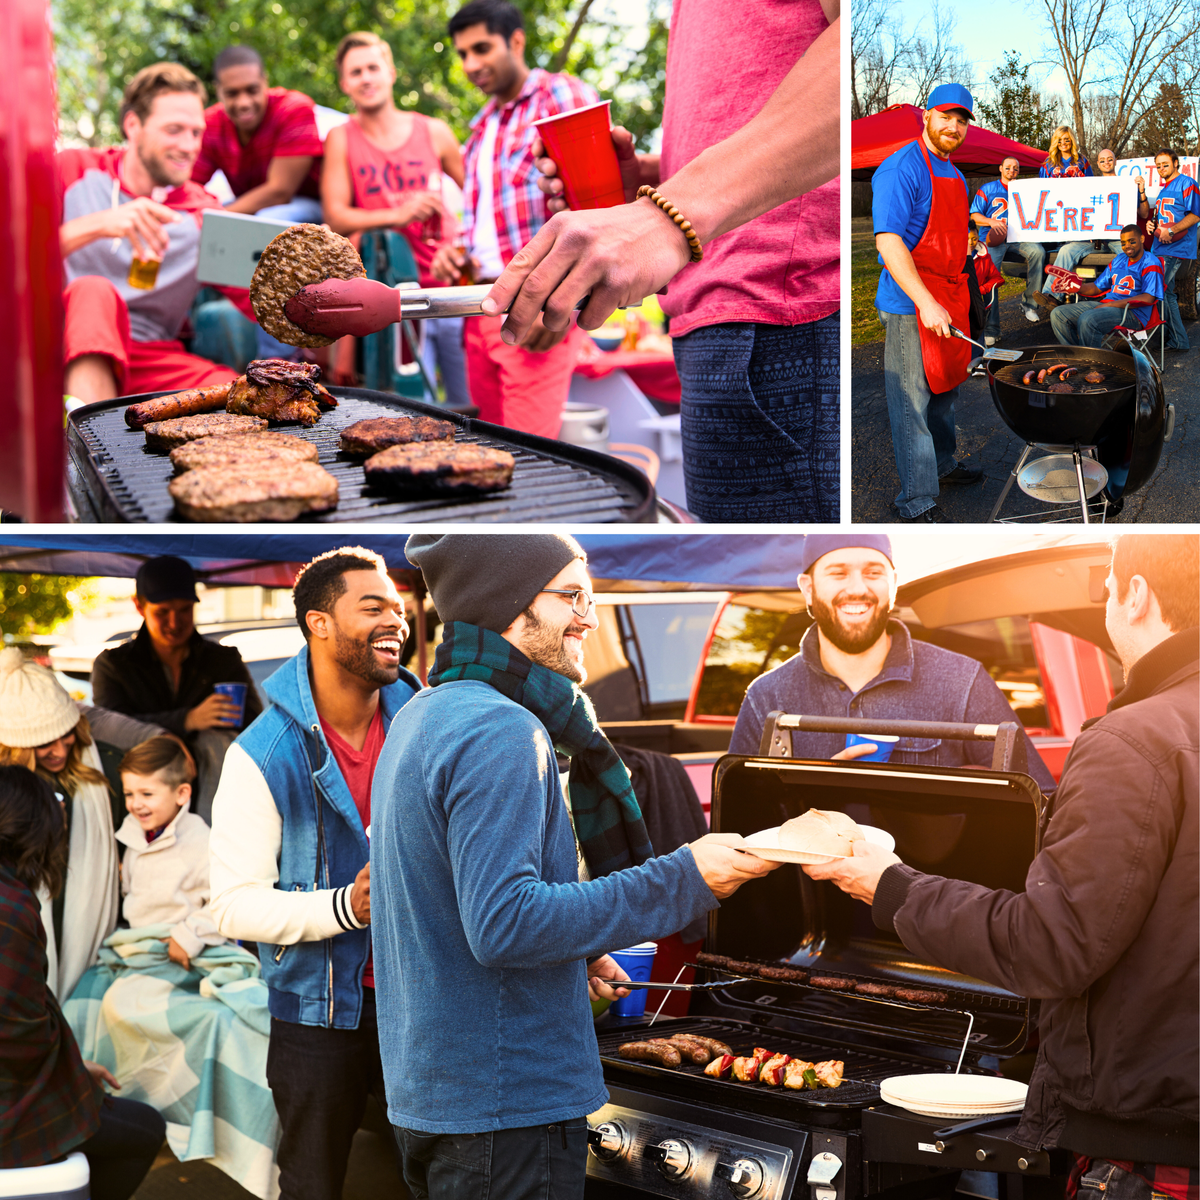 3 Pictures of people tailgating and grilling with friends